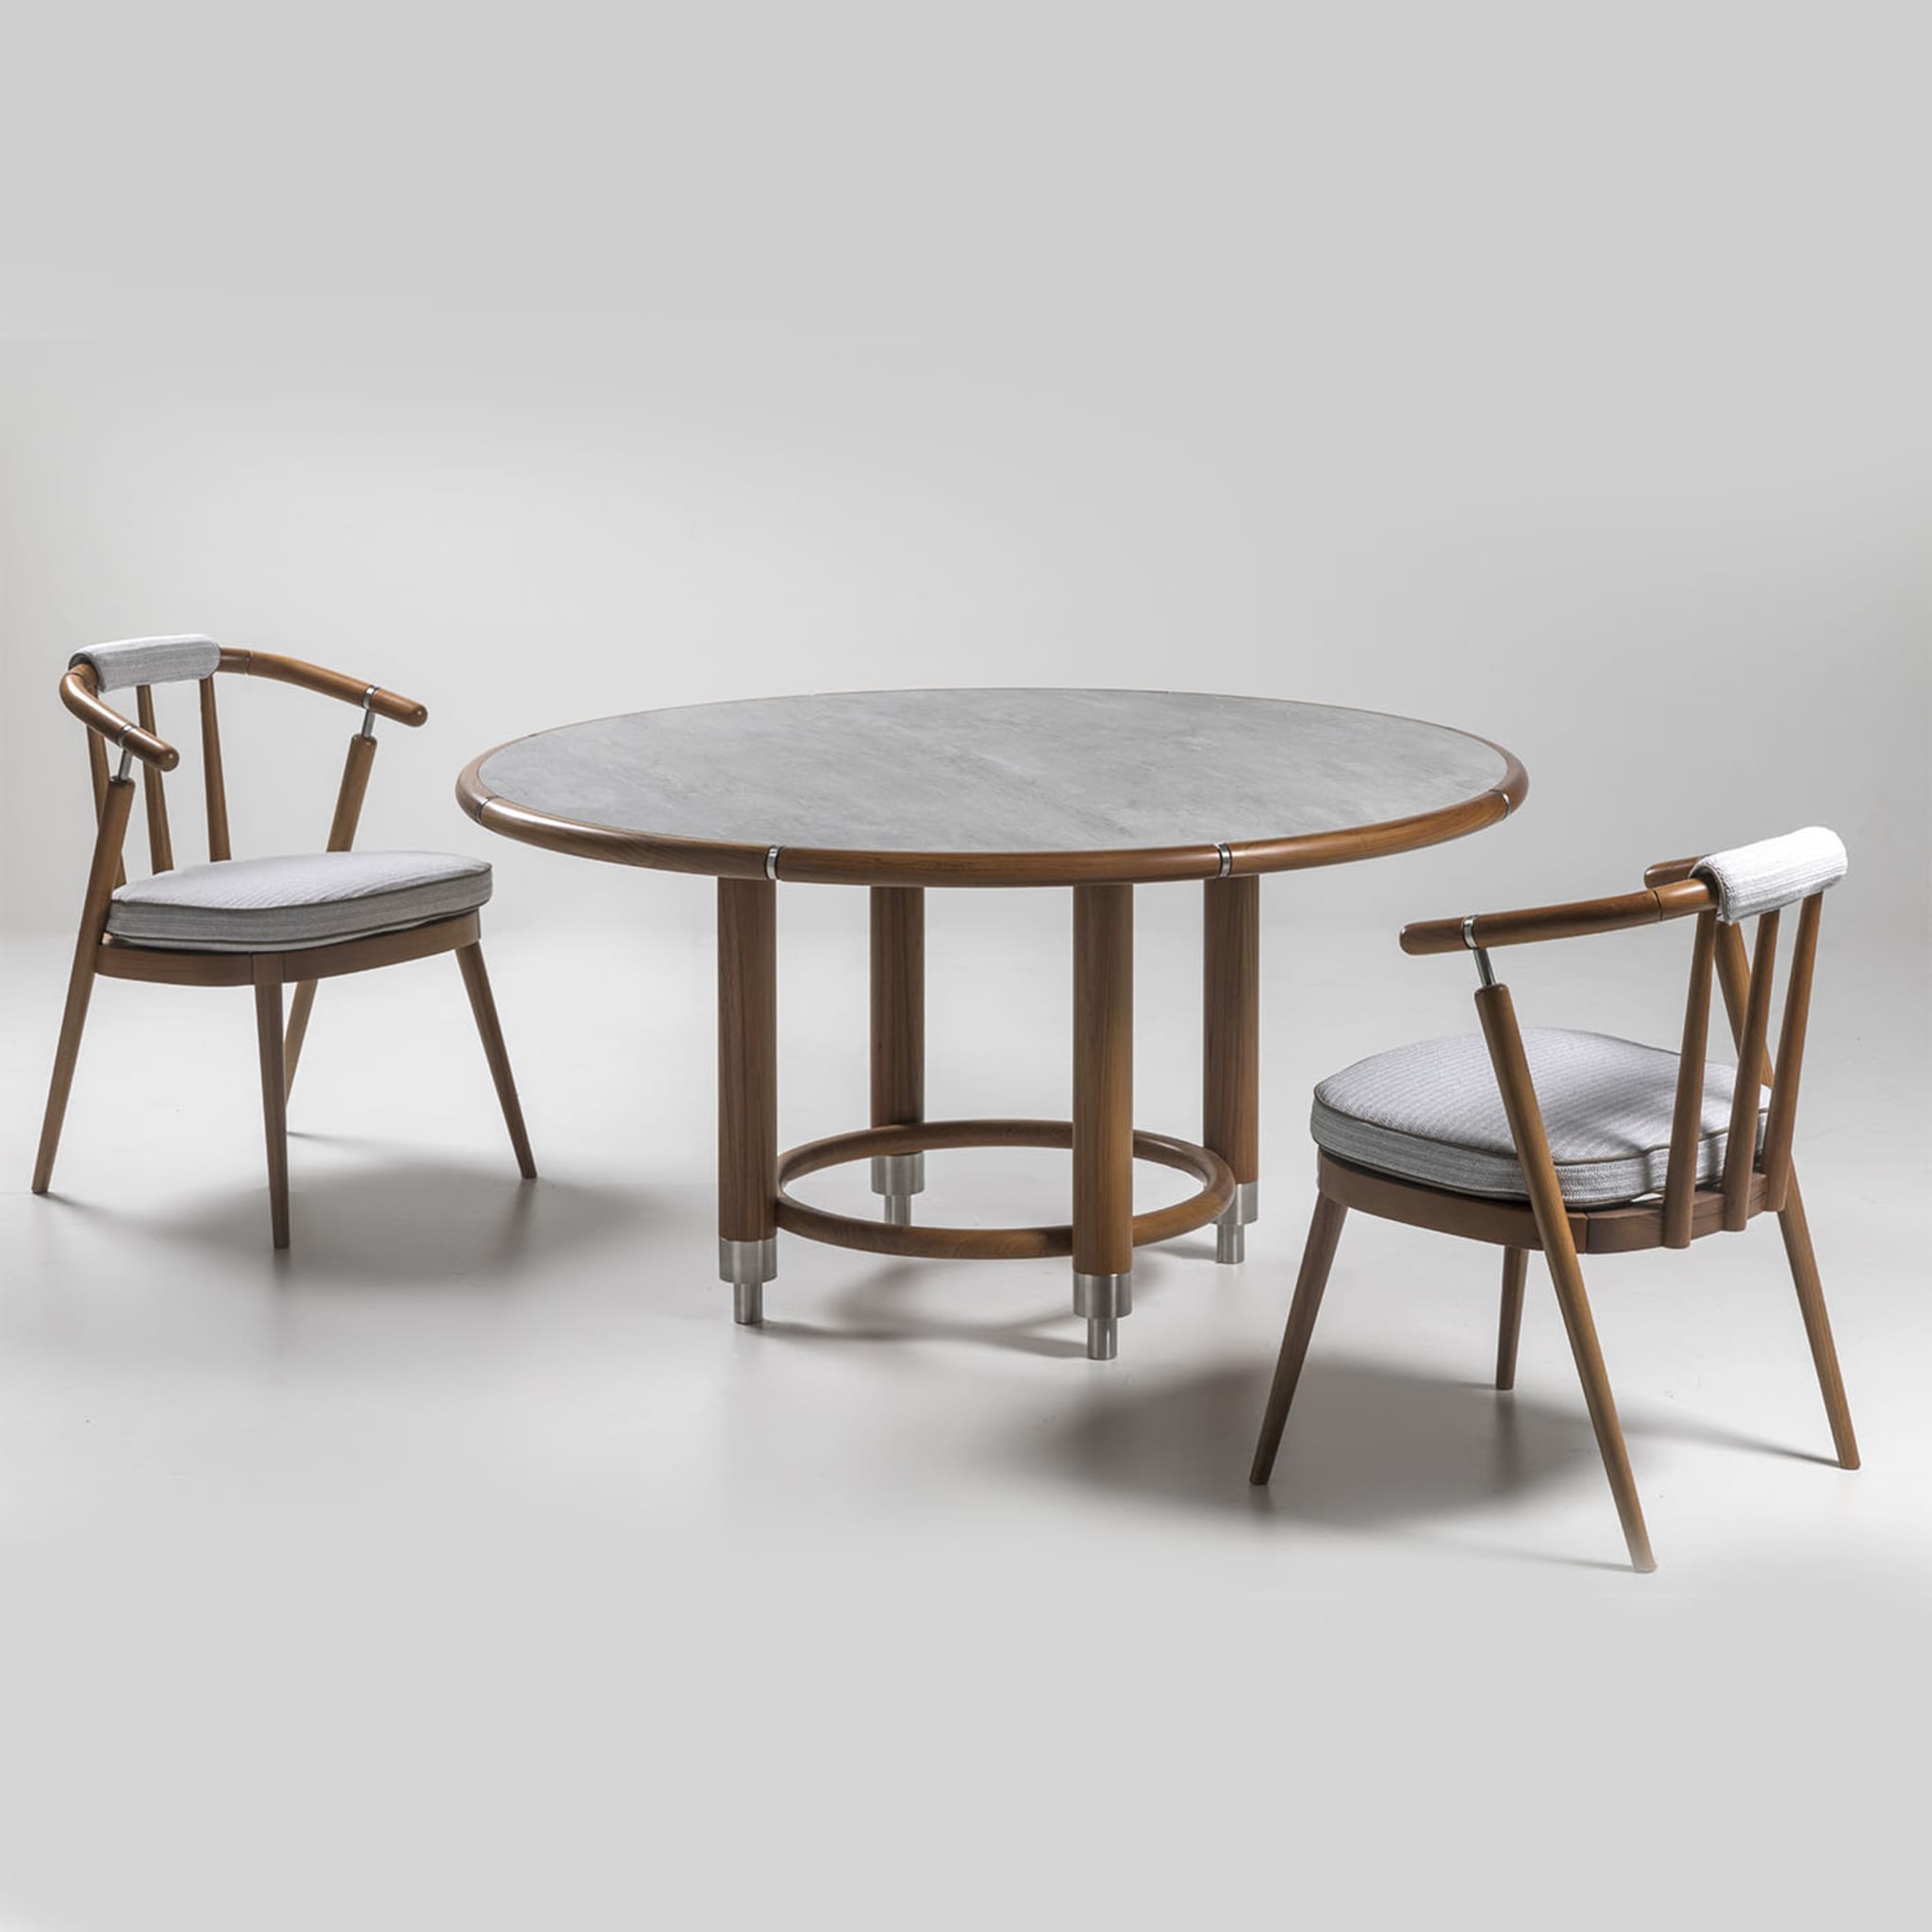 Timo Round Outdoor Table - Alternative view 2